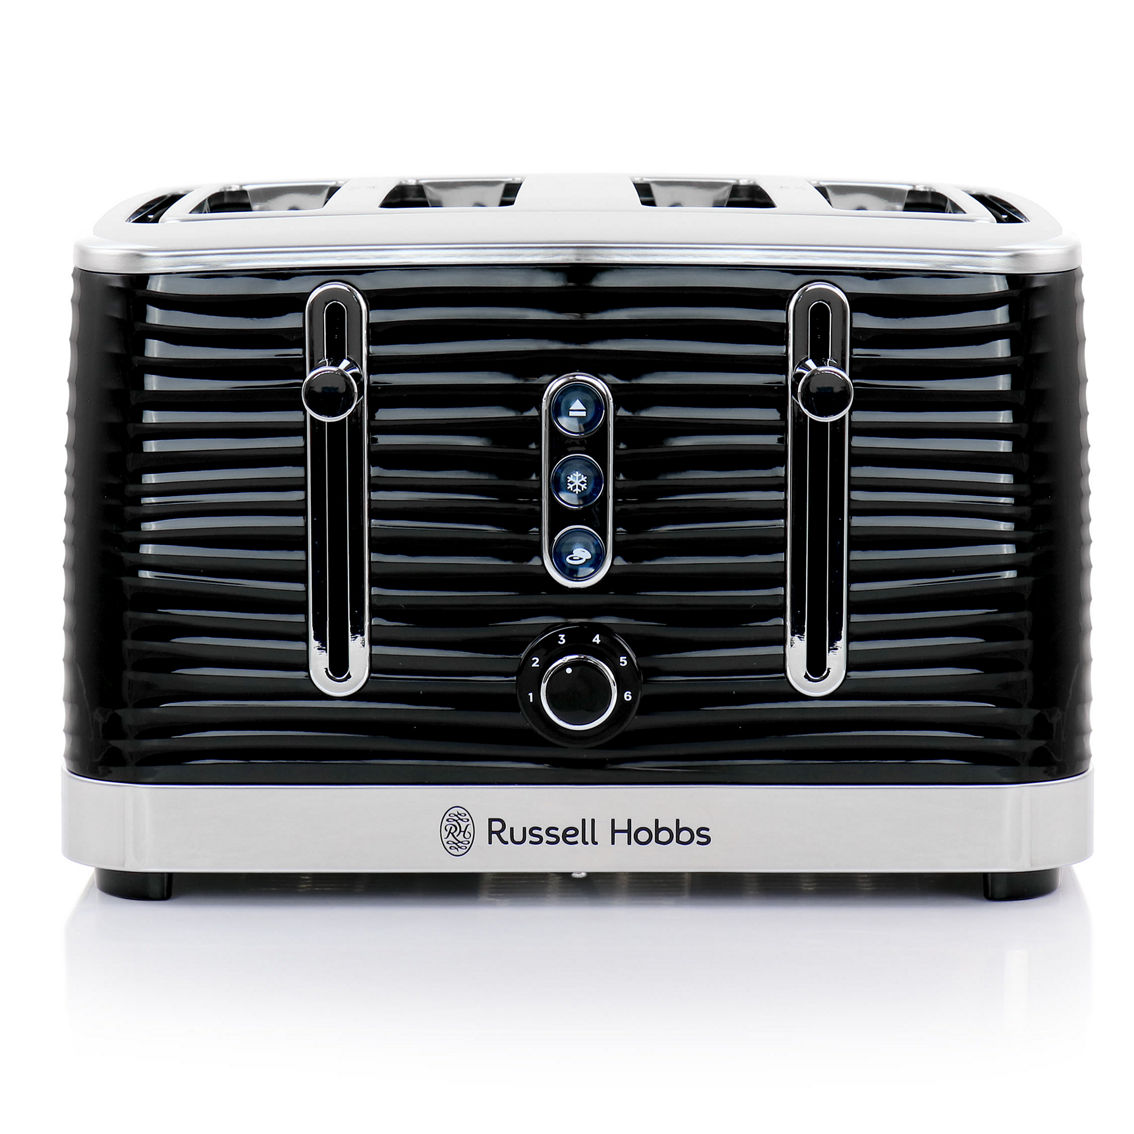 Russell Hobbs Retro Style 4 Slice Toaster in Black - Image 2 of 5